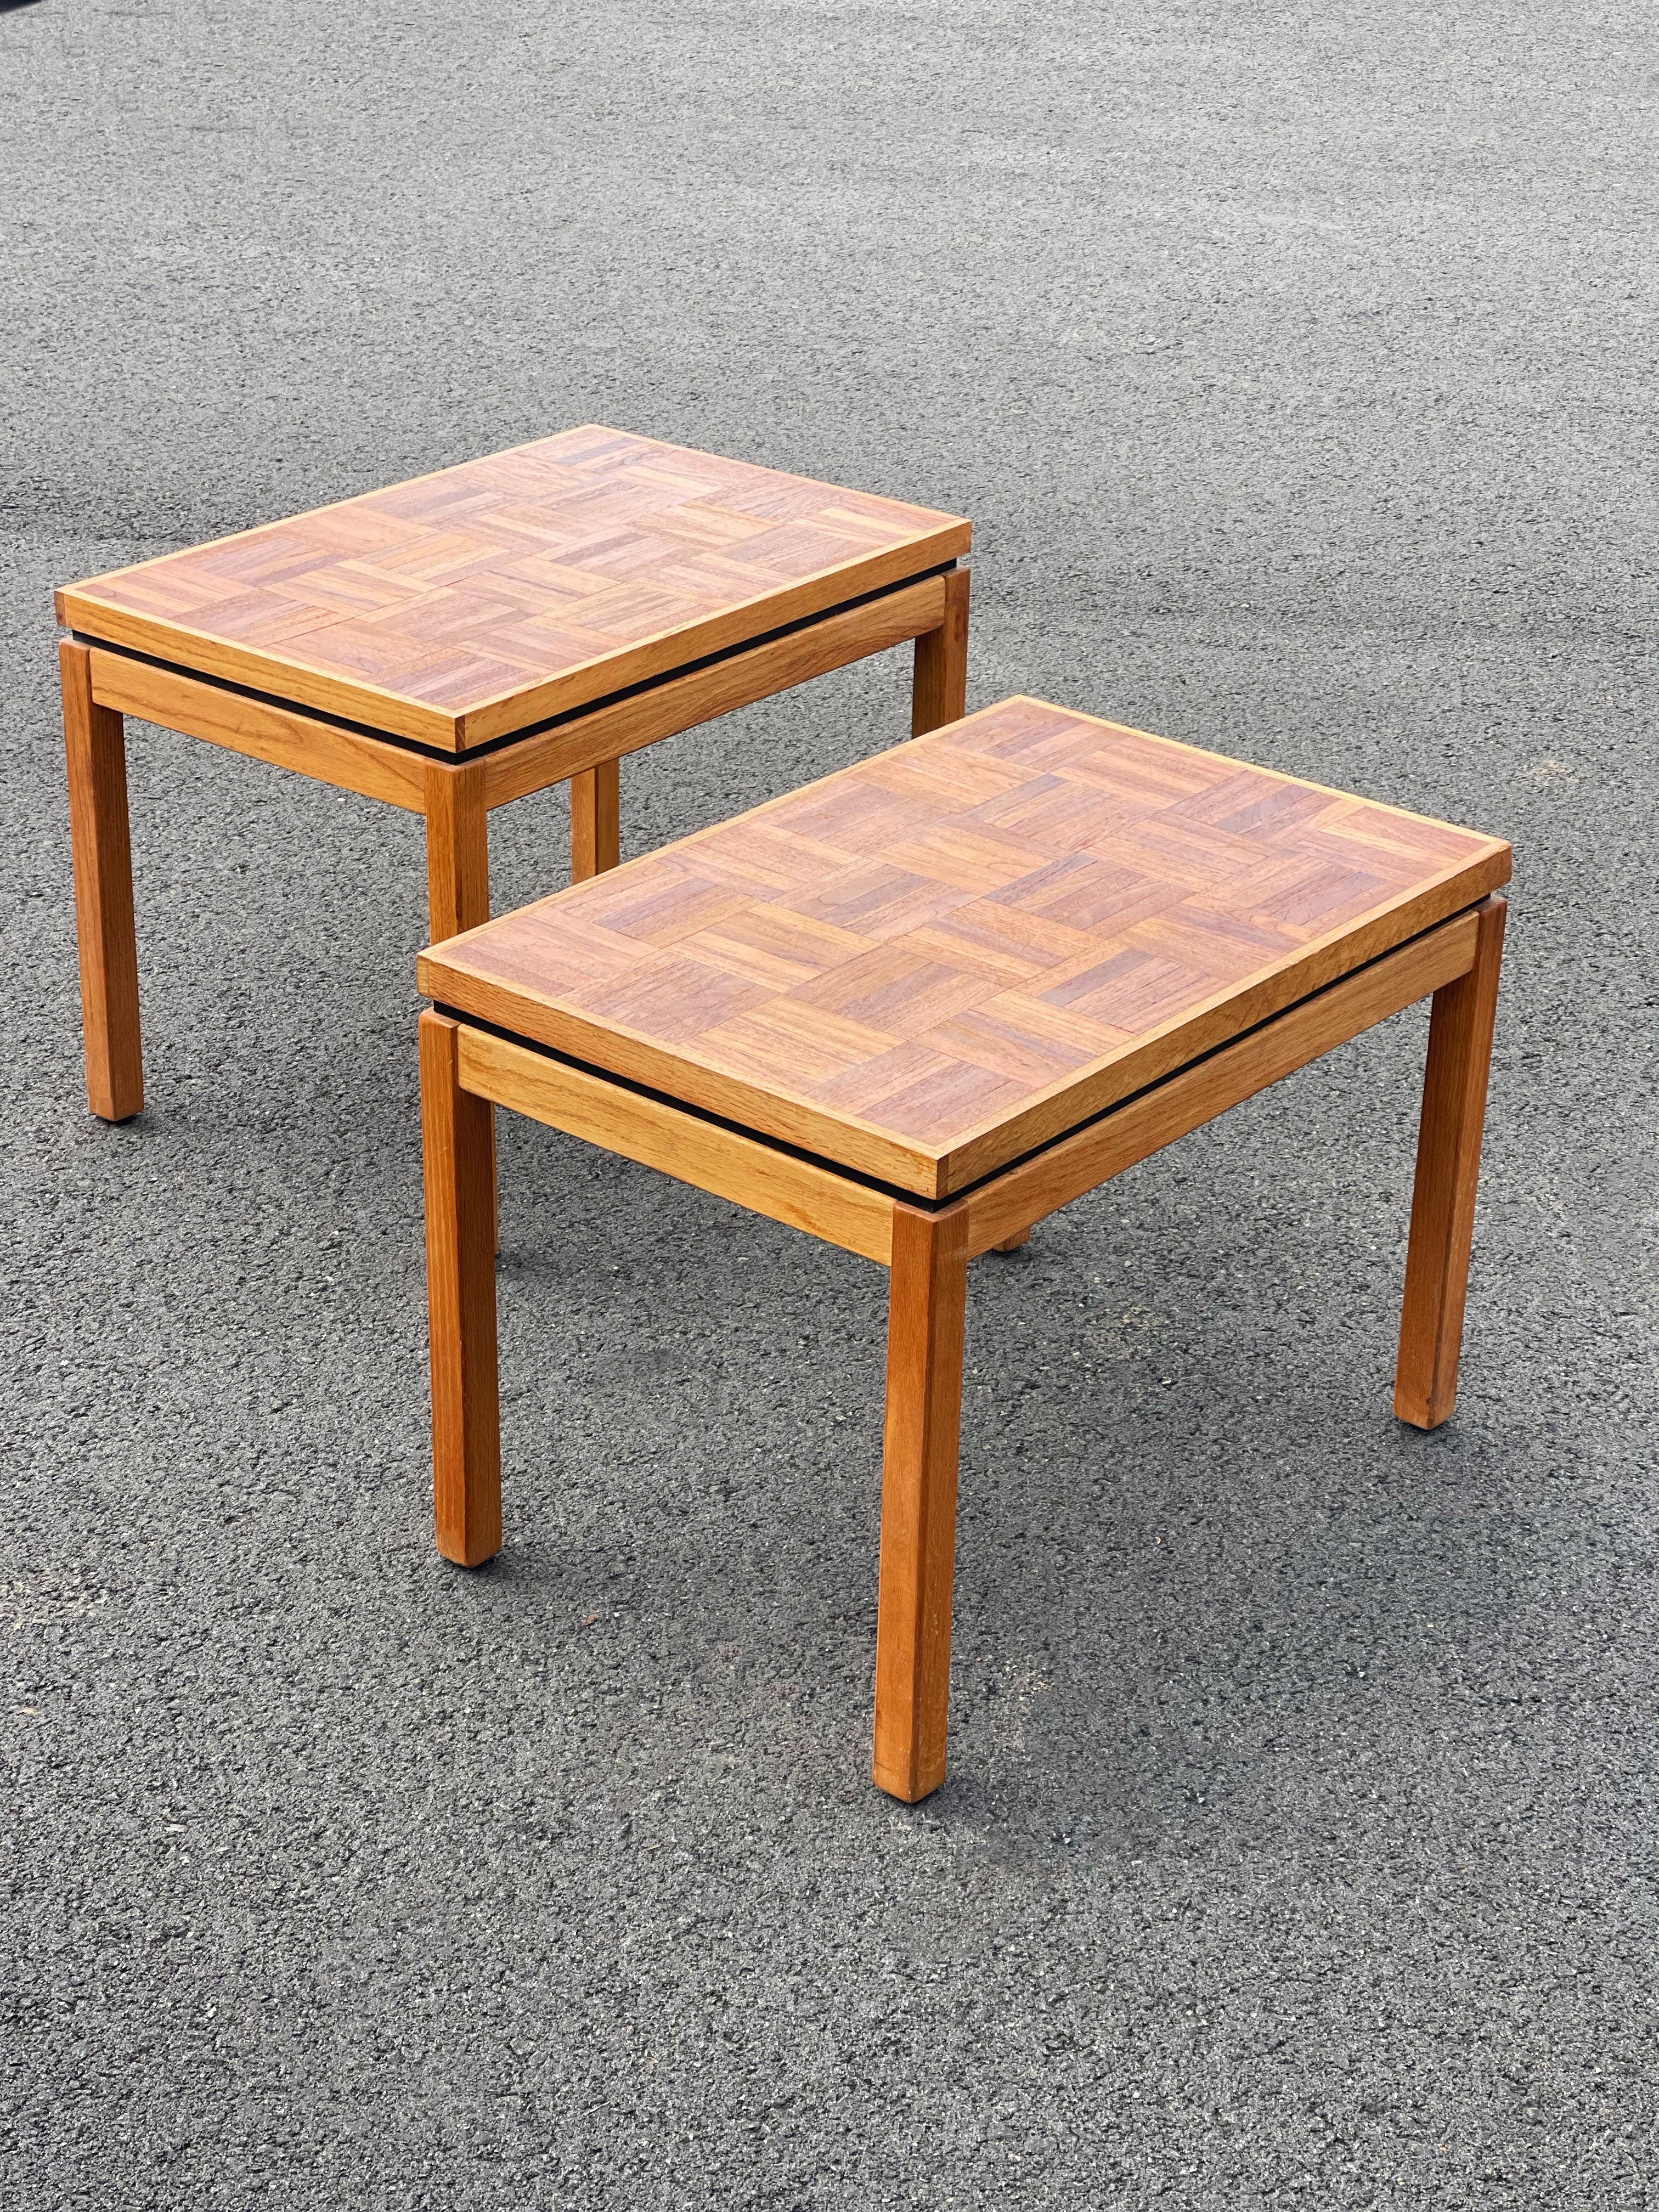 Stunning original 1970s side tables with checkered woodwork detail. Original from Denmark. A timeless design to compliment any decor. In great original condition. 